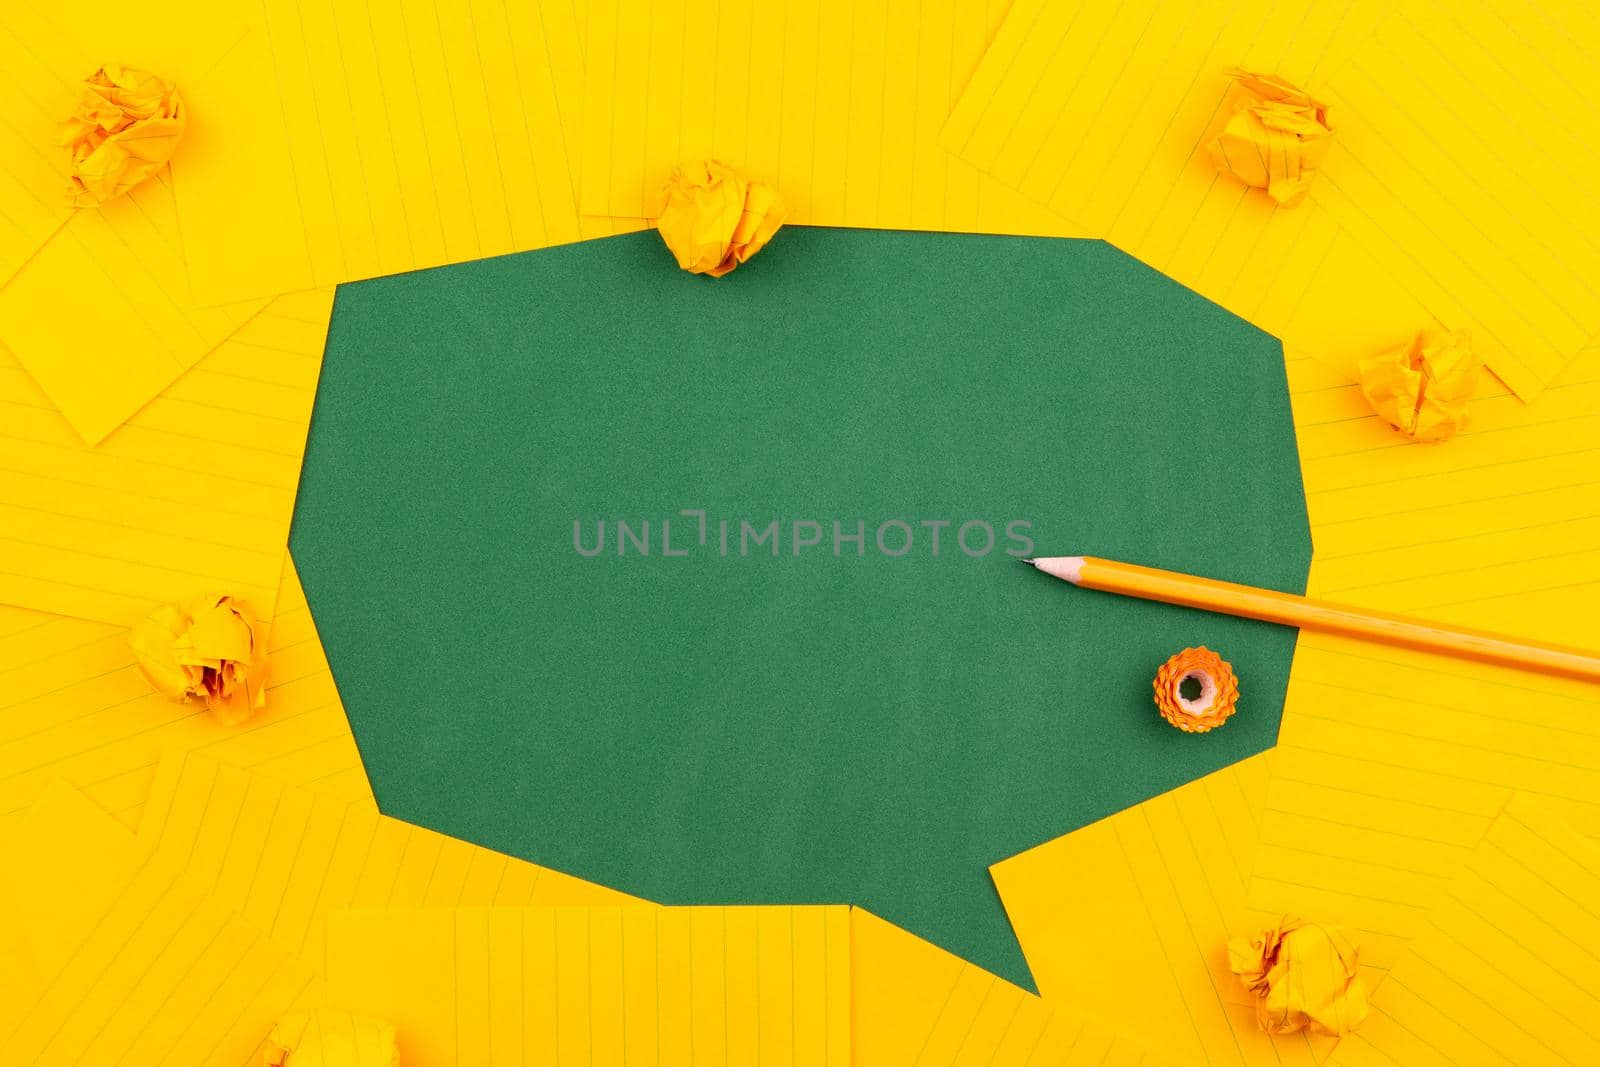 orange sheets of paper lie on a green school board and form a chat bubble with pencil, crumpled papers and copy space for text